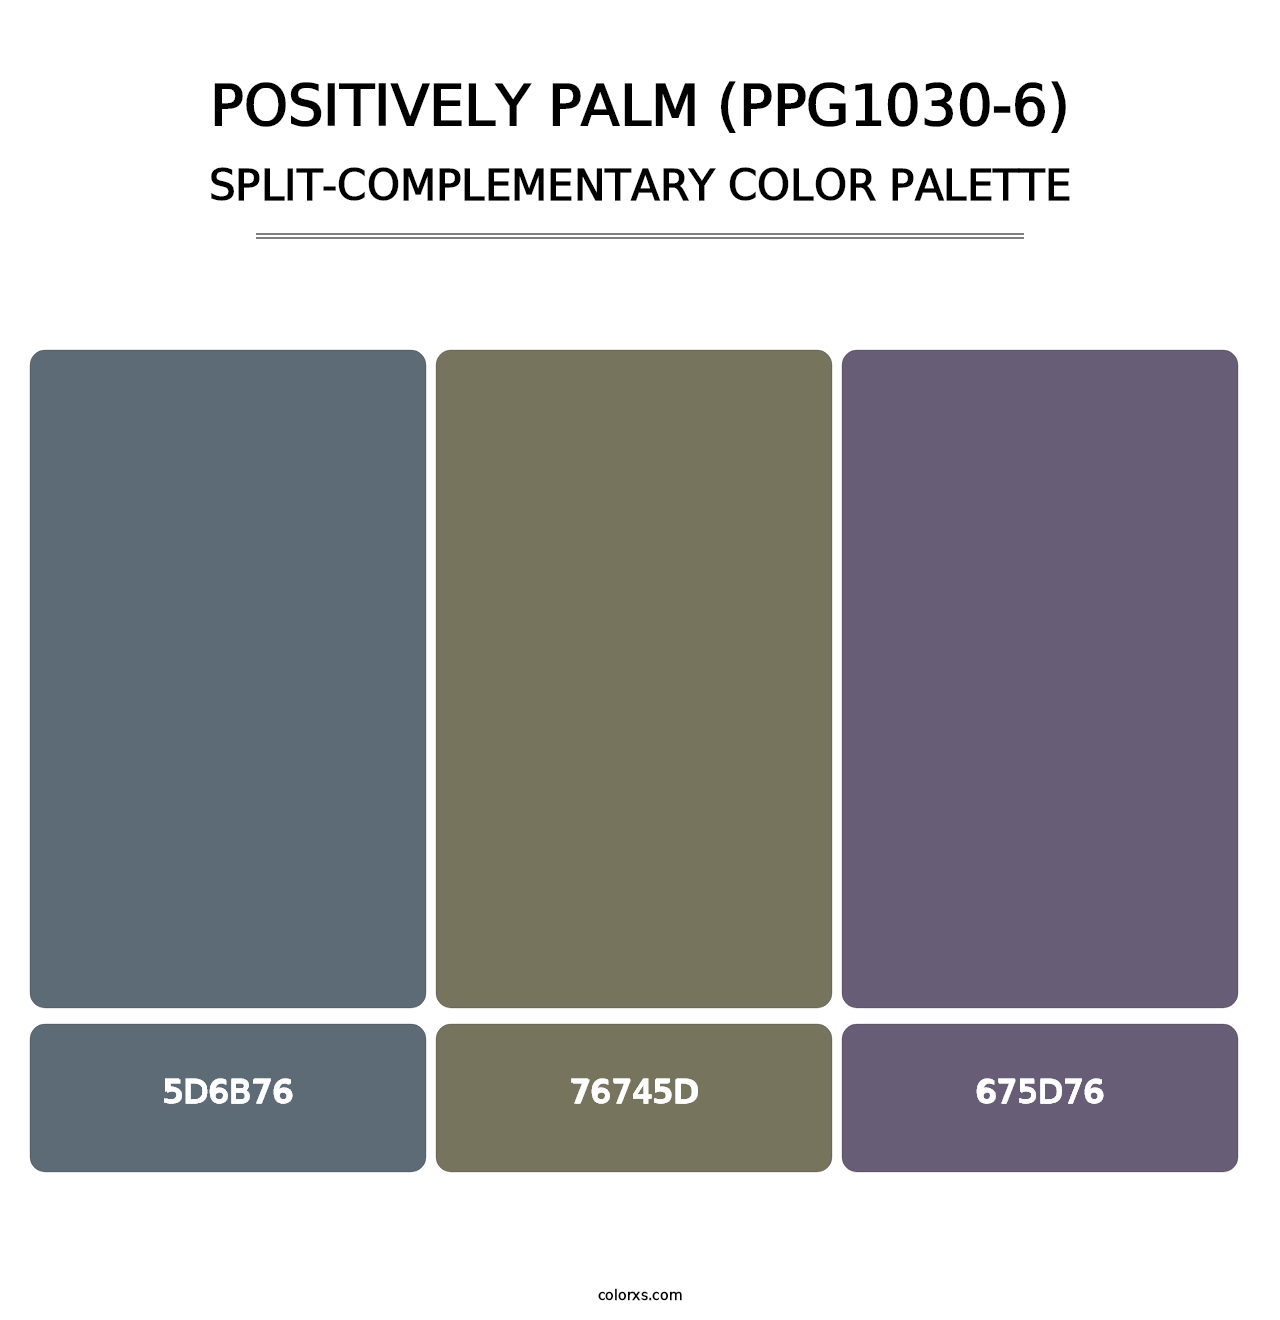 Positively Palm (PPG1030-6) - Split-Complementary Color Palette